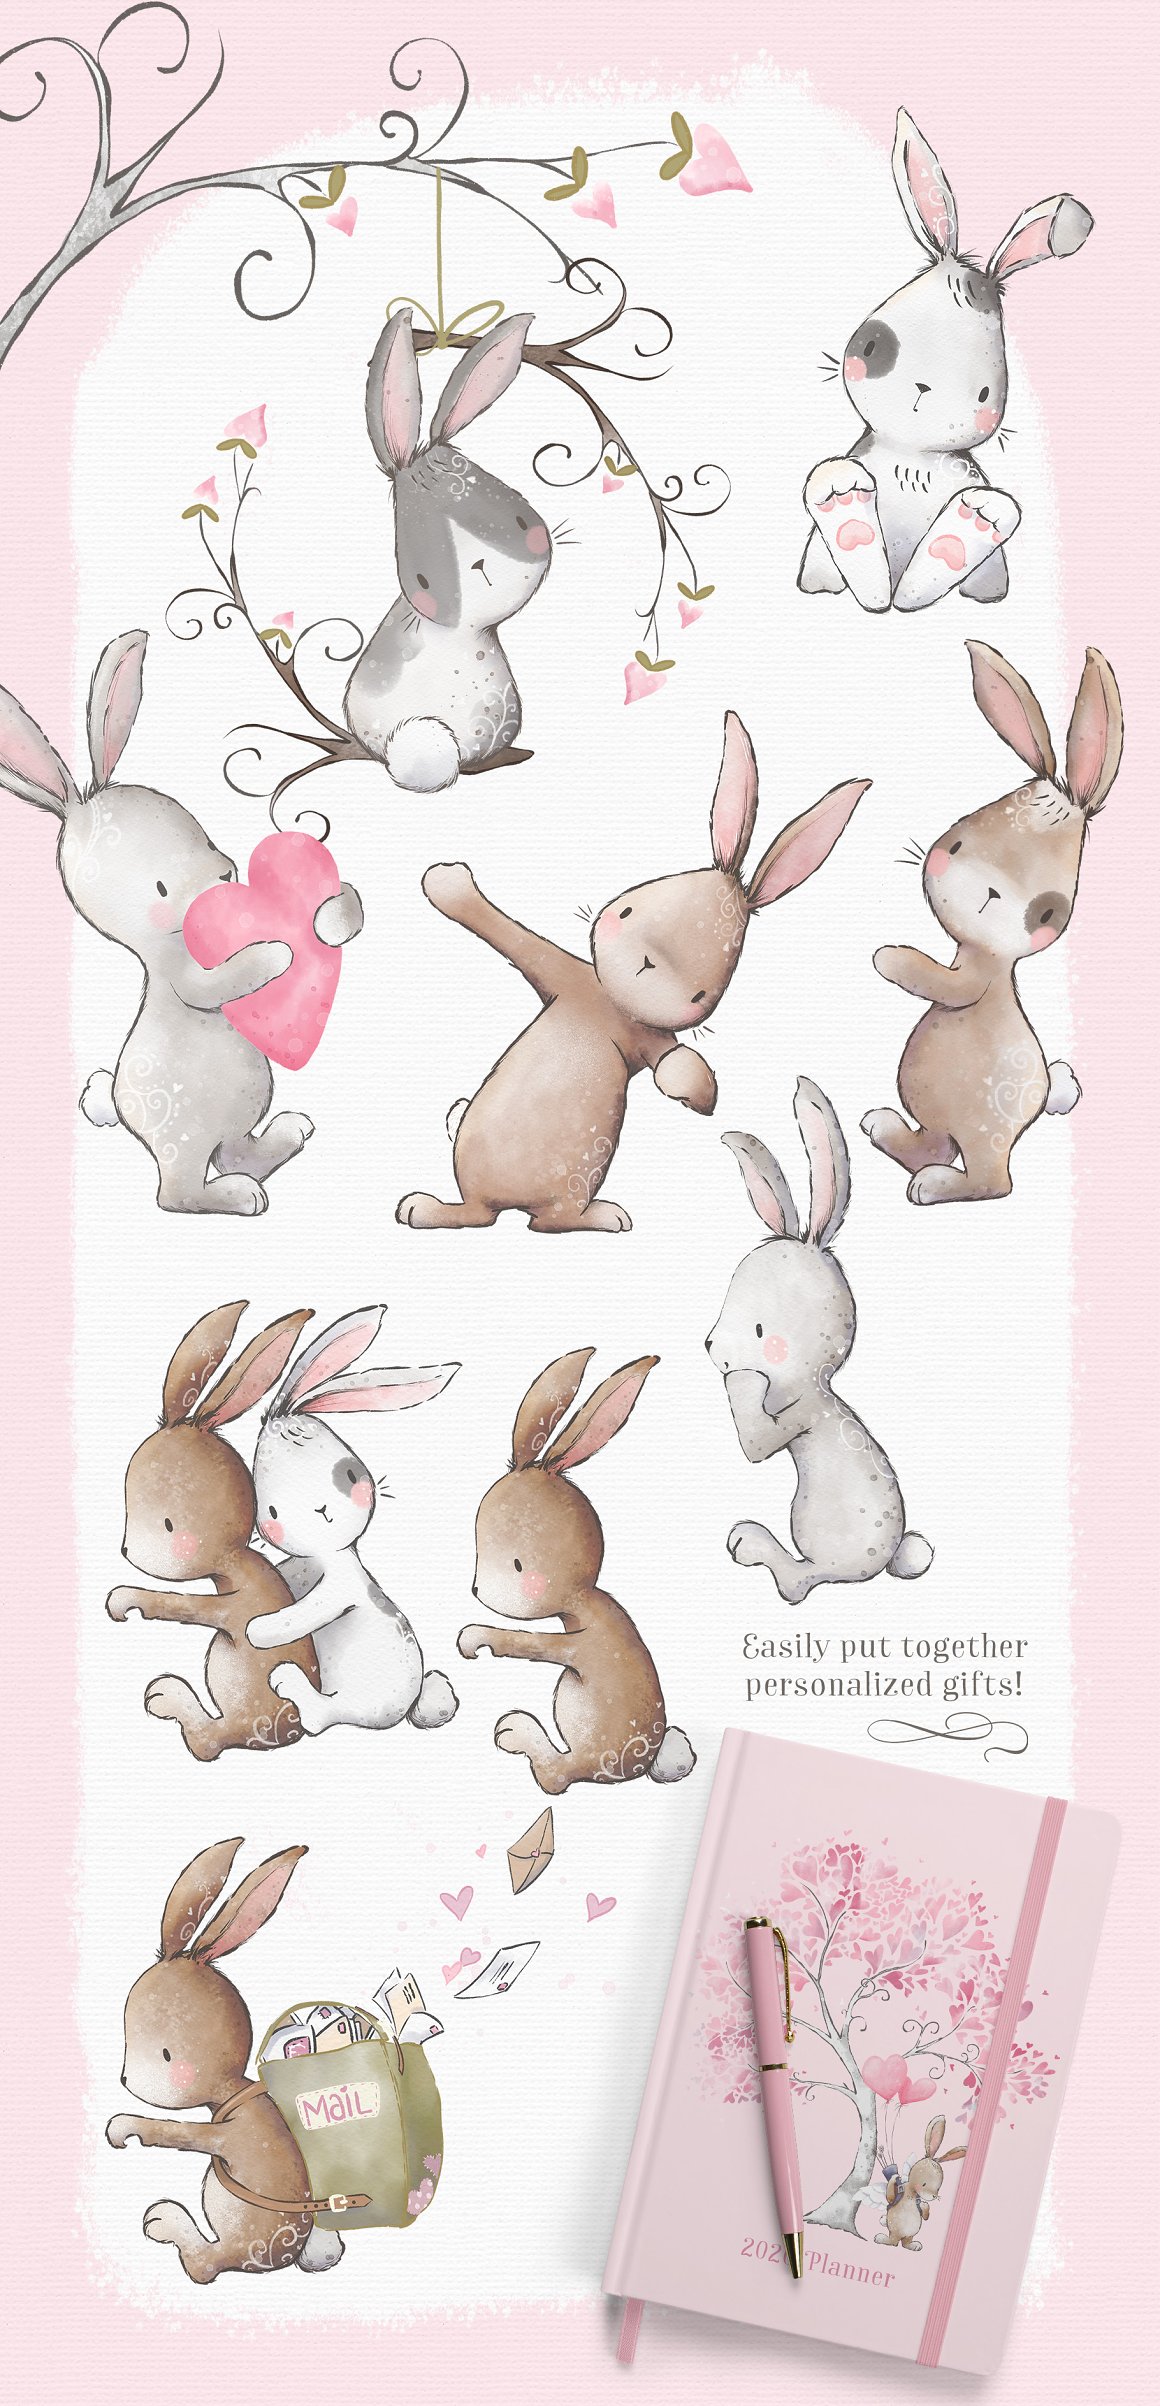 A set of 9 different illustrations of a bunny on a pink background.